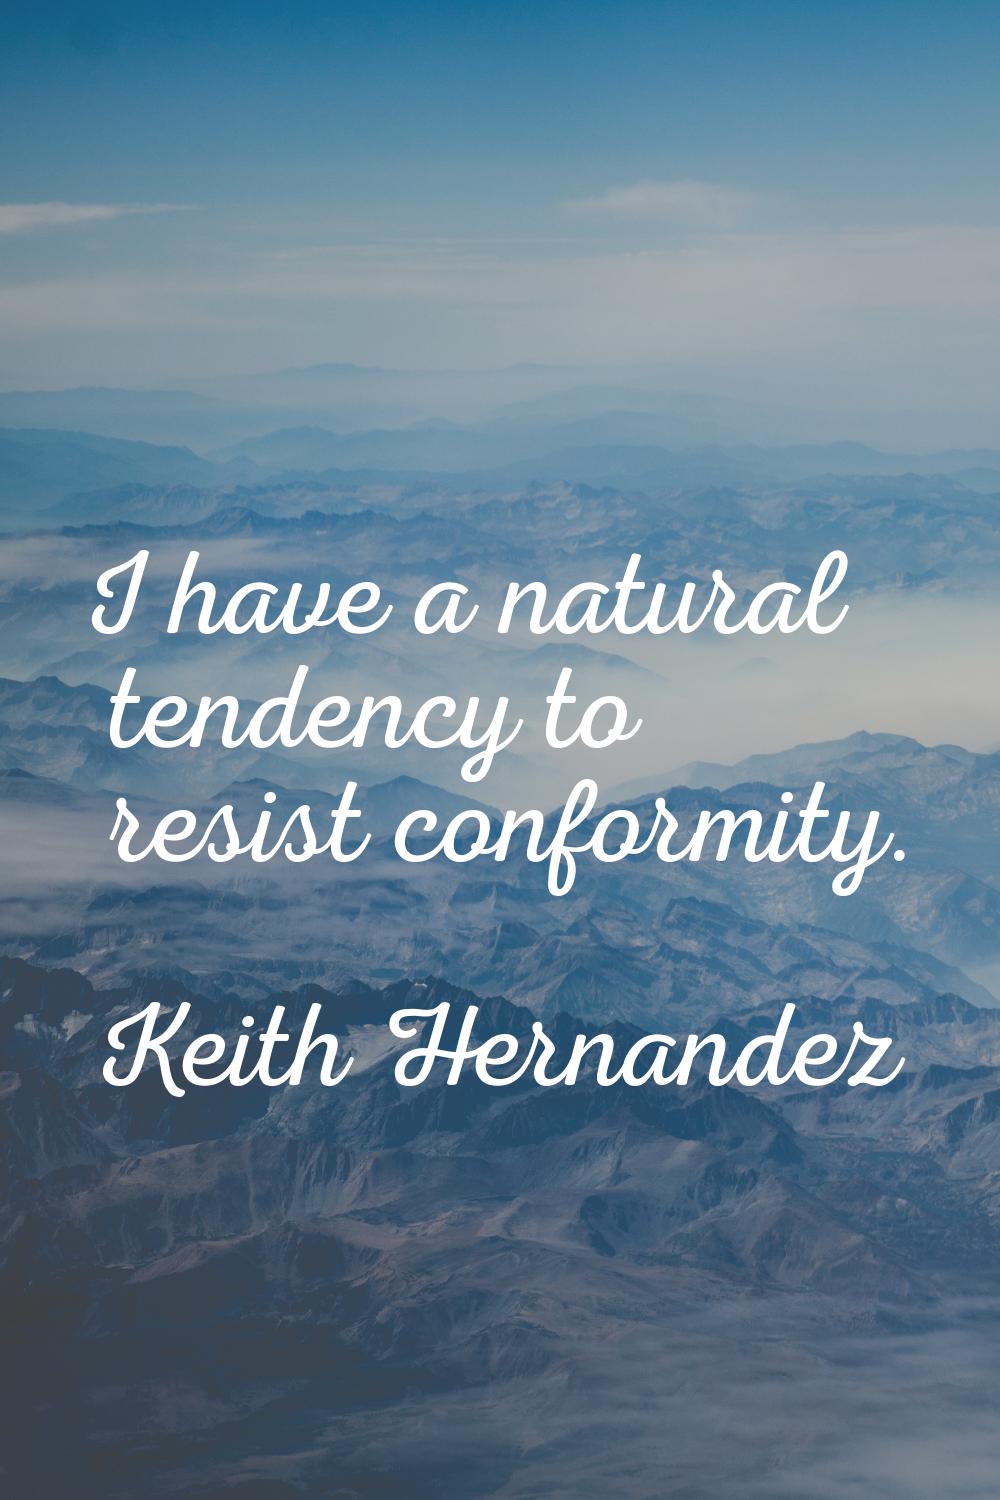 I have a natural tendency to resist conformity.